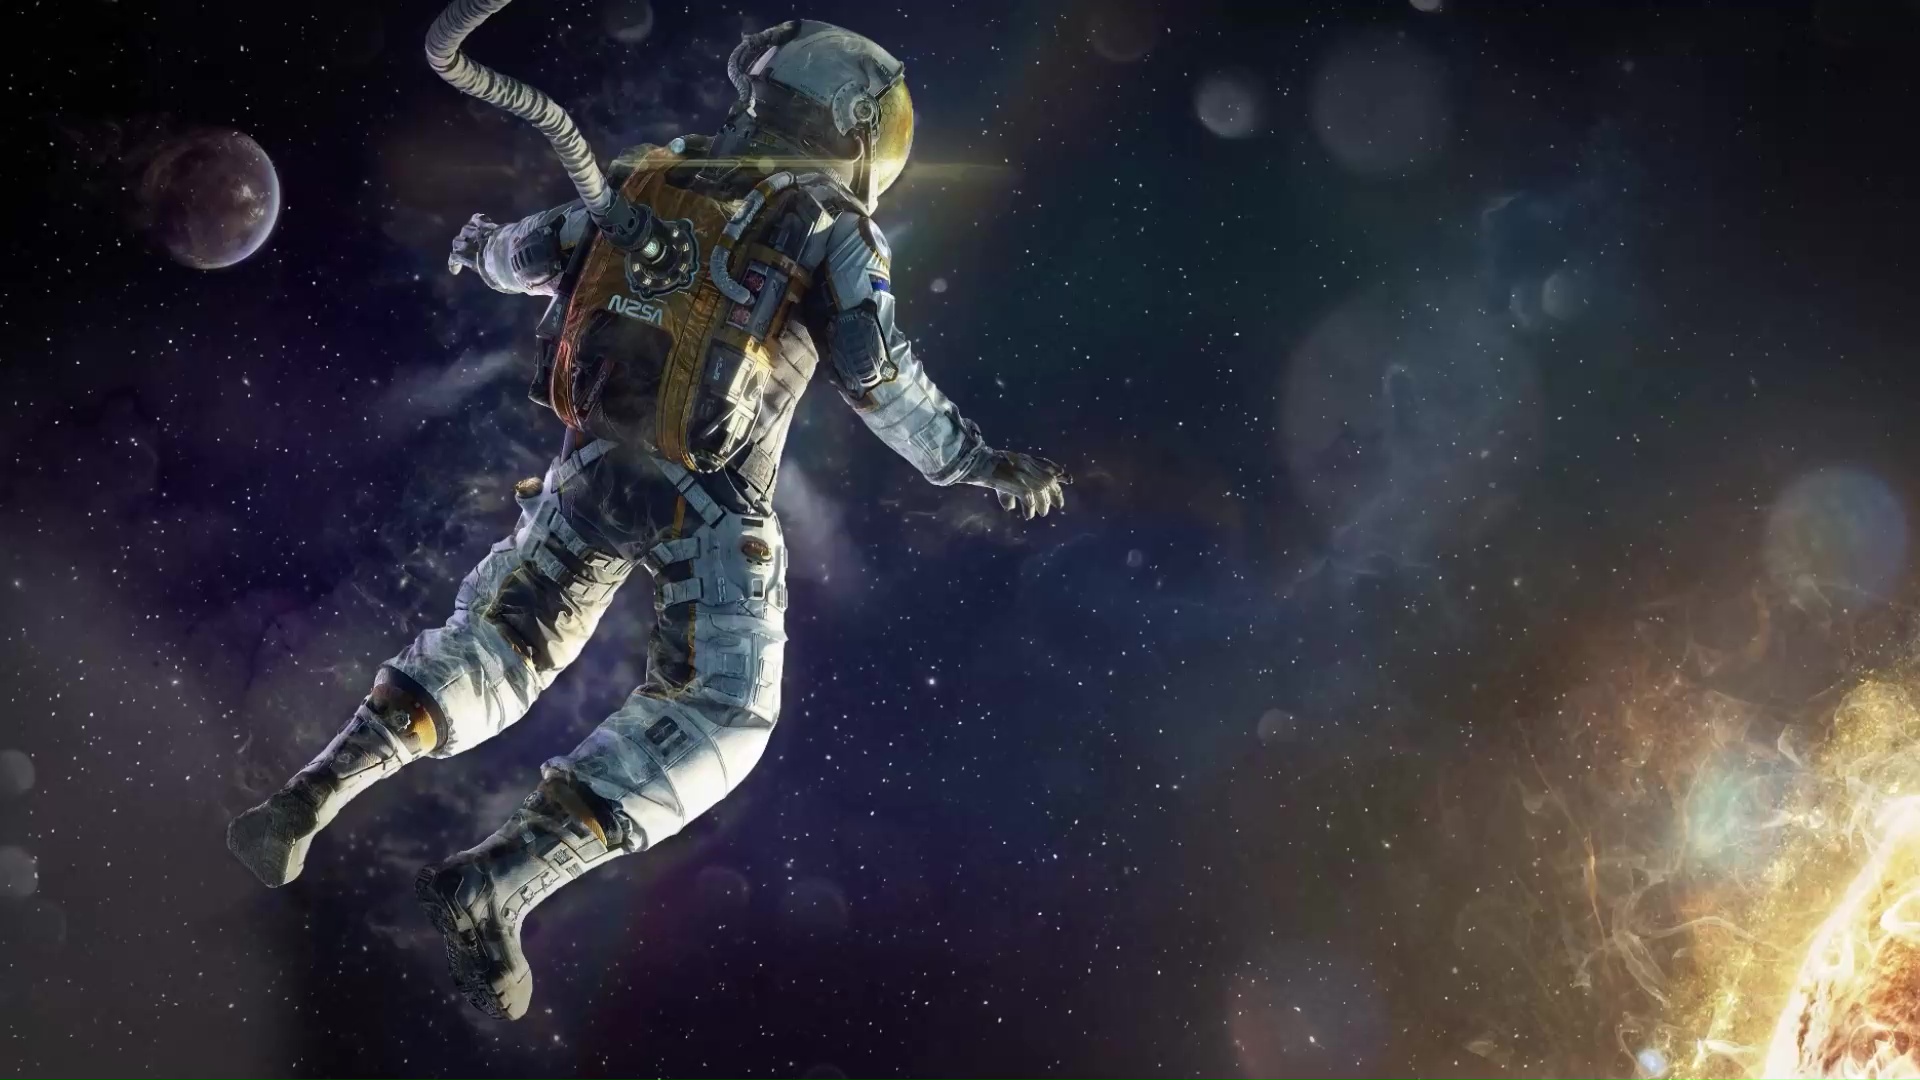 Live wallpaper Floating In Space No Astronaut Version 4K DOWNLOAD FREE  2819286518